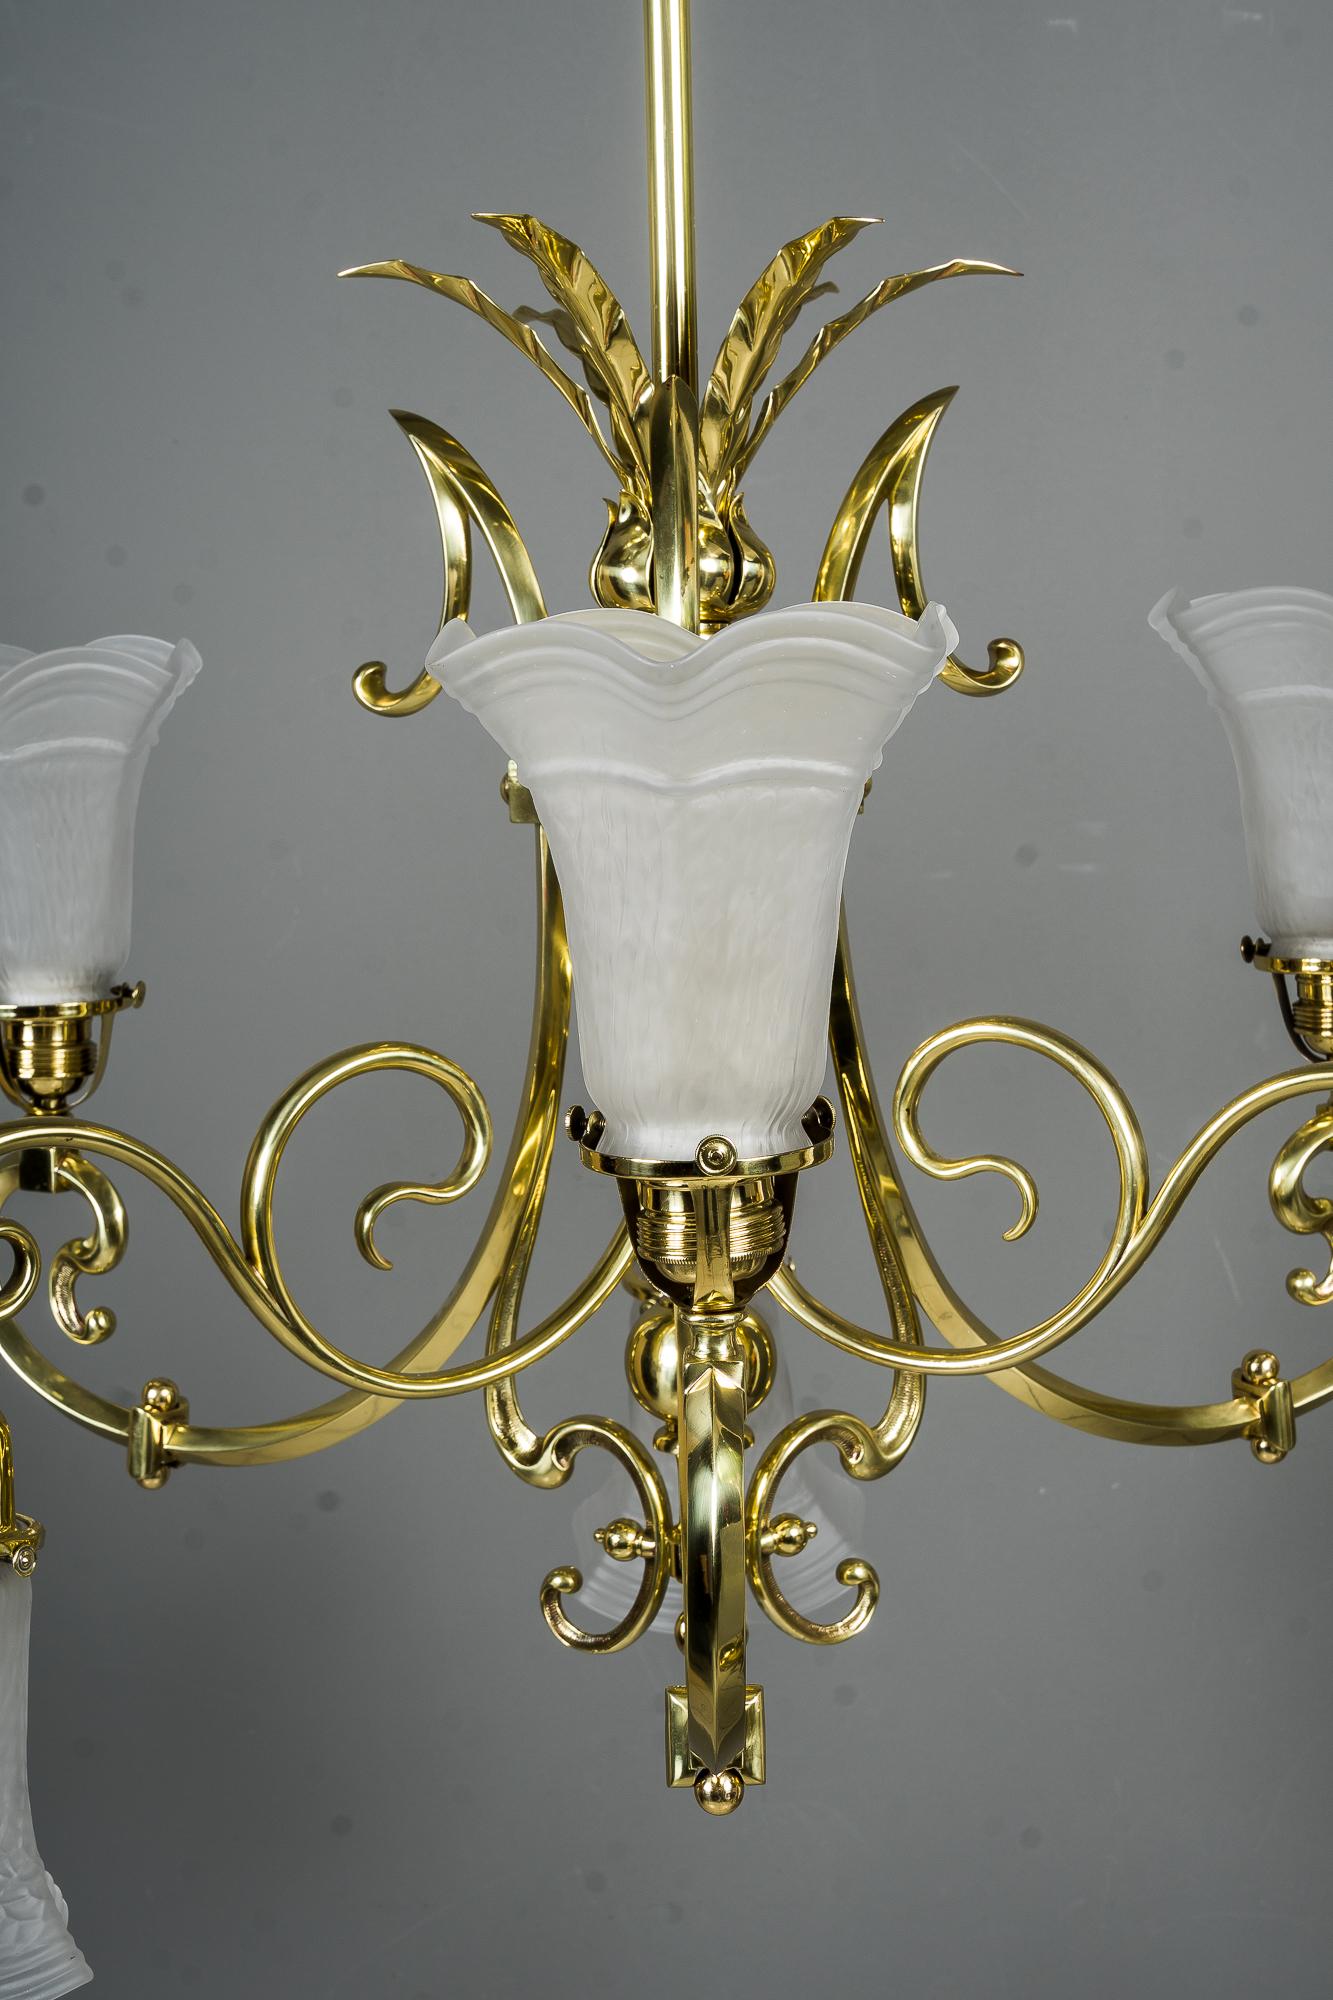 Big Historistic chandelier vienna around 1890s
Brass polished and stove enamelled.